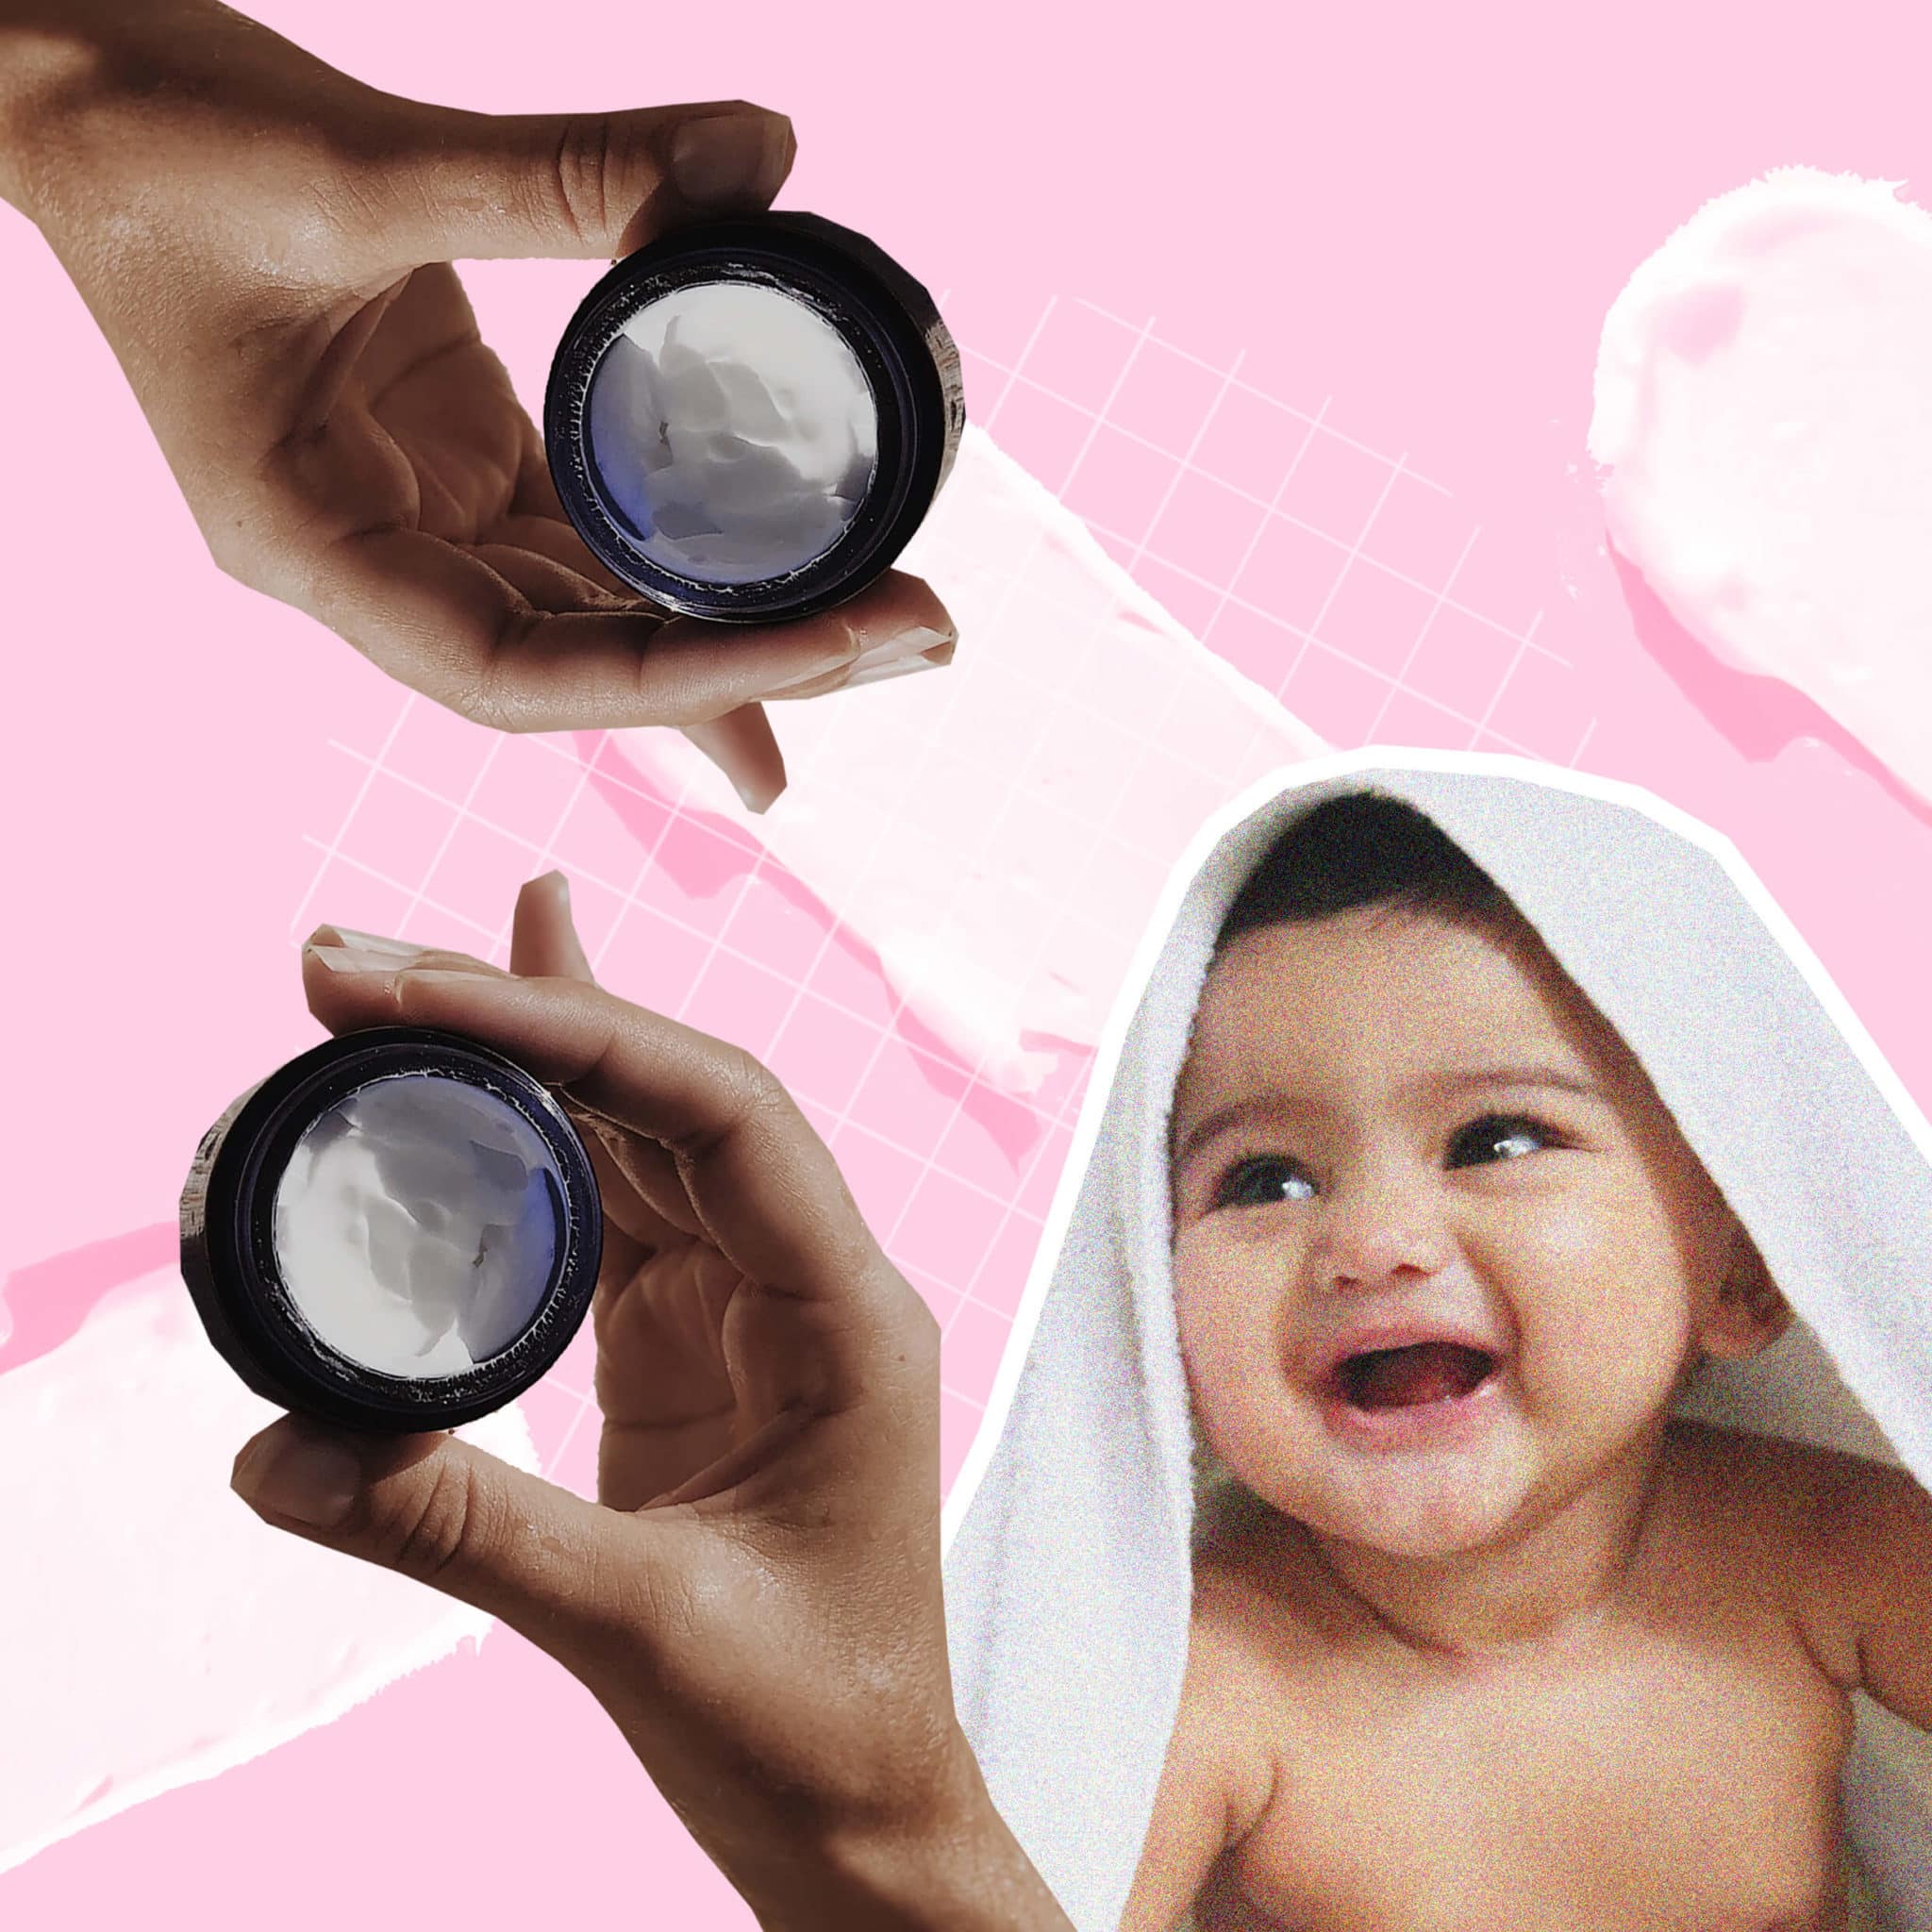 How I Dealt With My Baby's Eczema - The 3 Products That Worked for Me